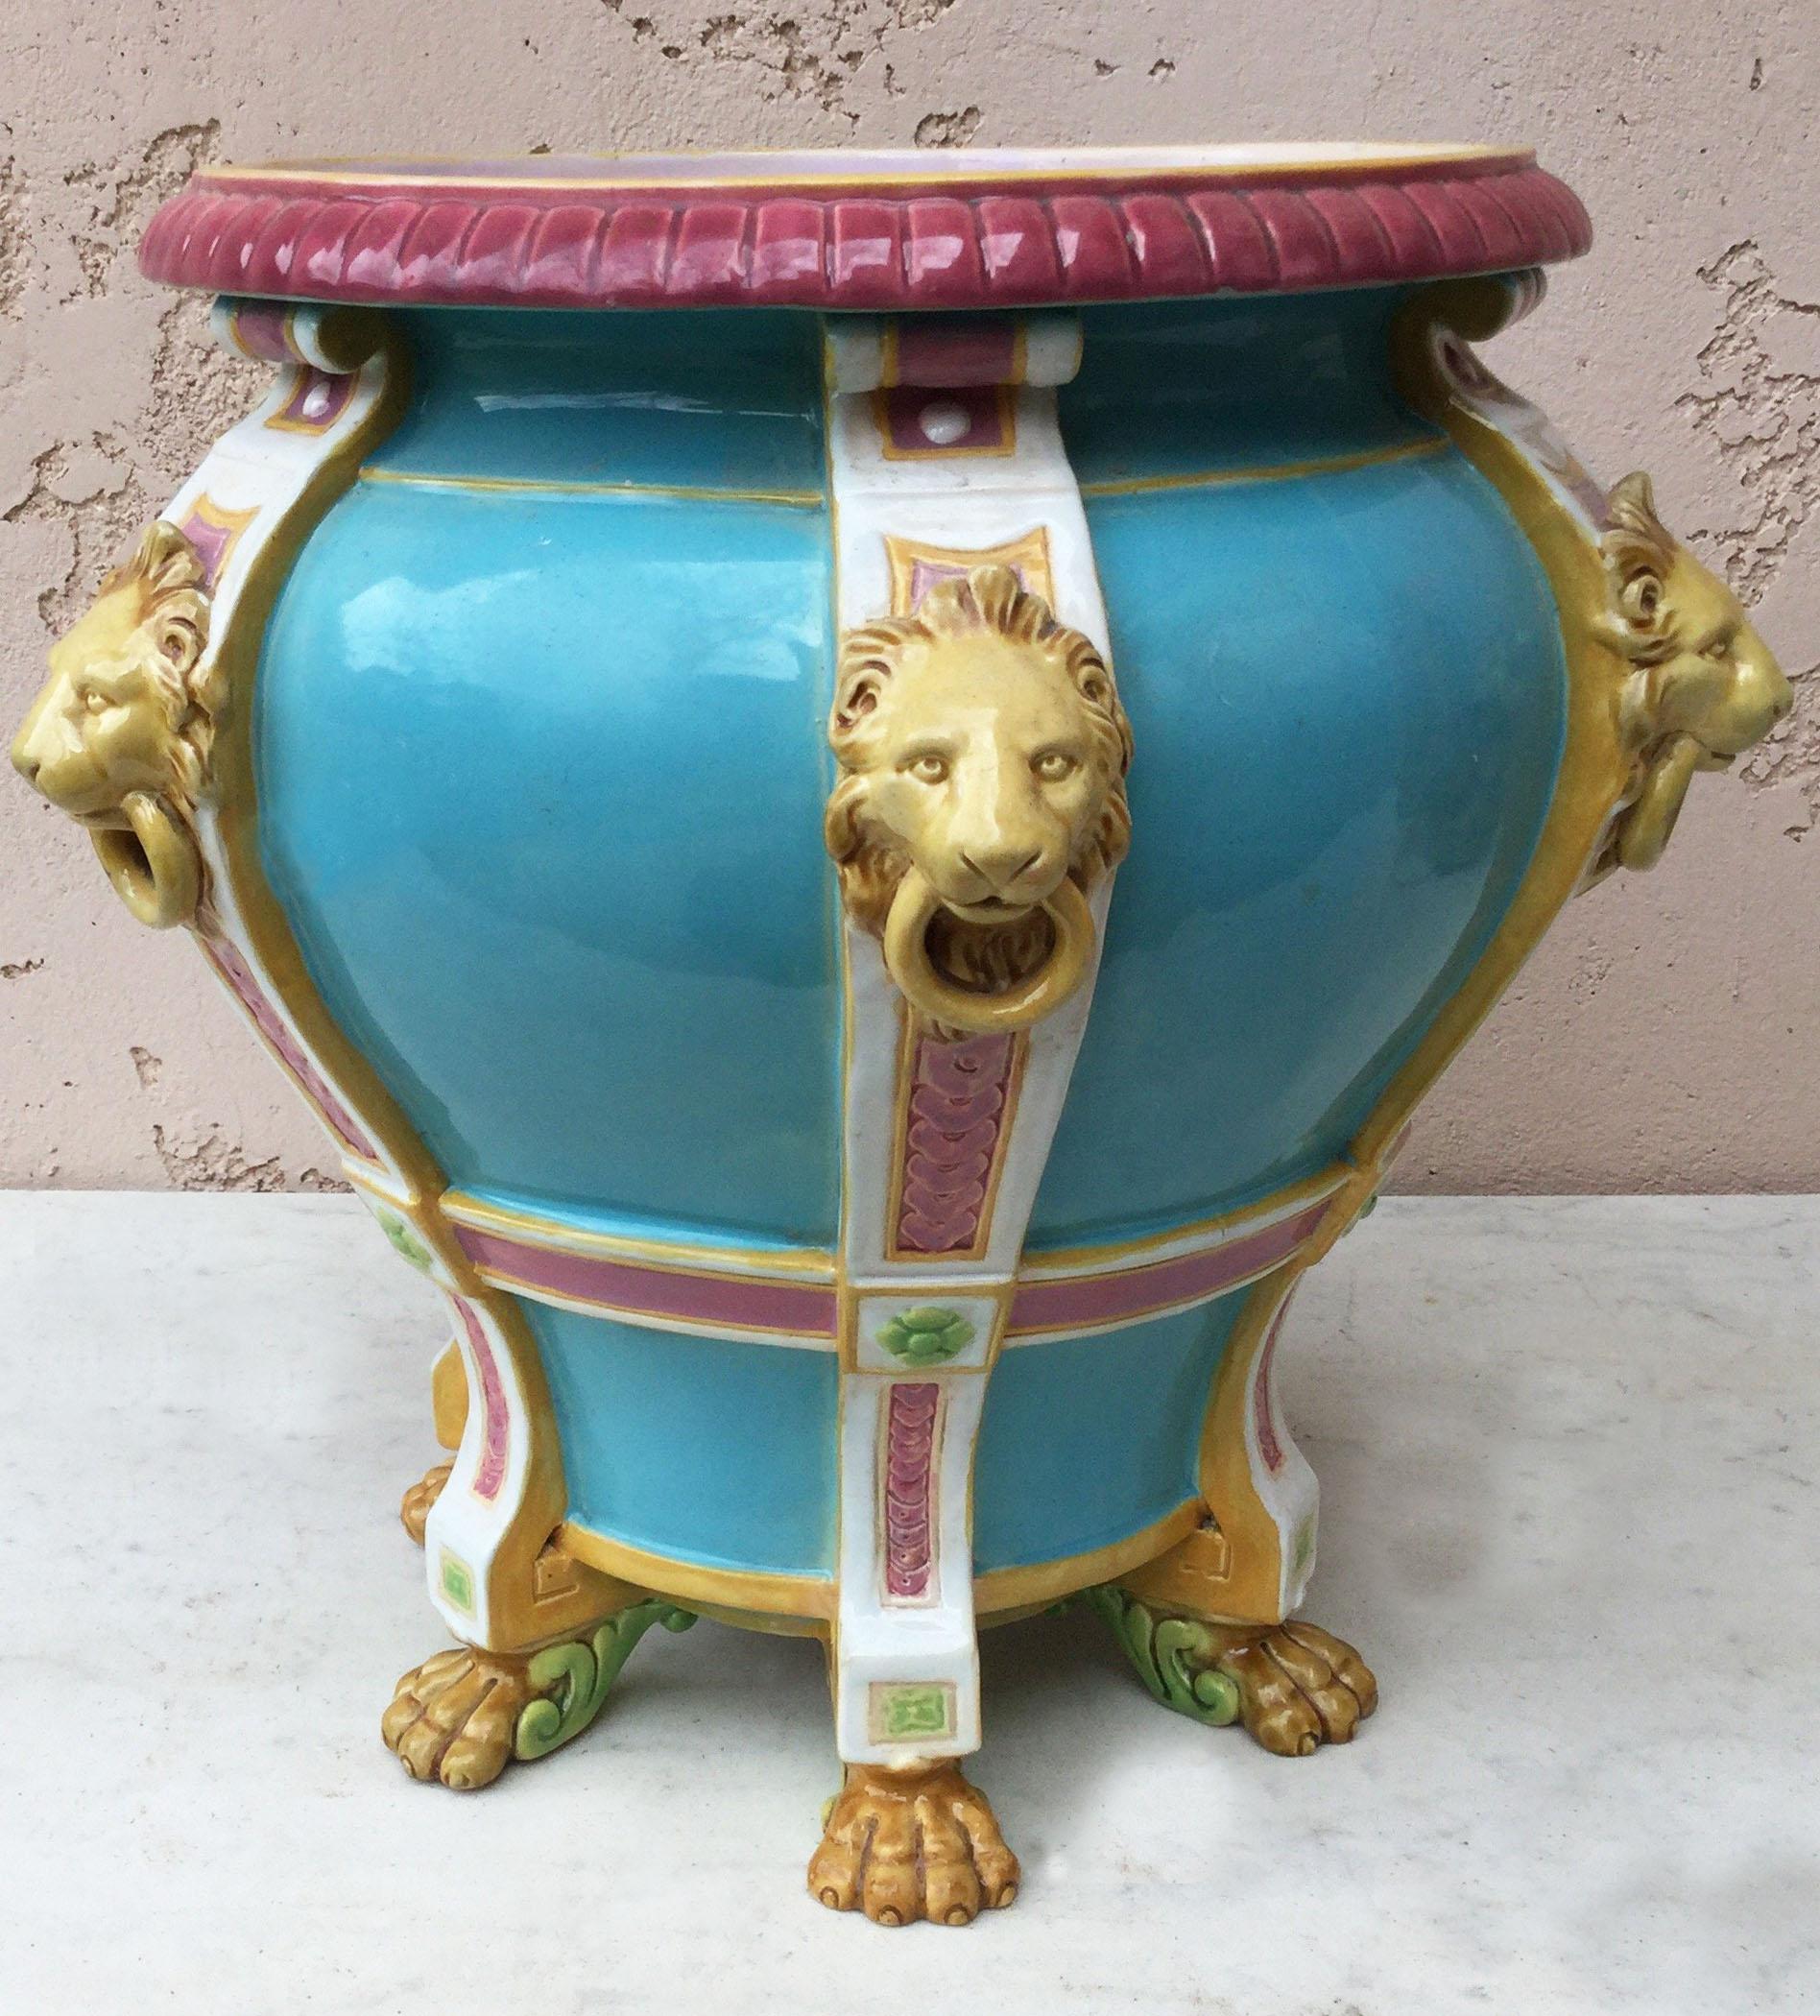 19th century aqua turquoise Minton jardiniere with six pilasters applied with lion mask and ring handles and stands on paw feet.